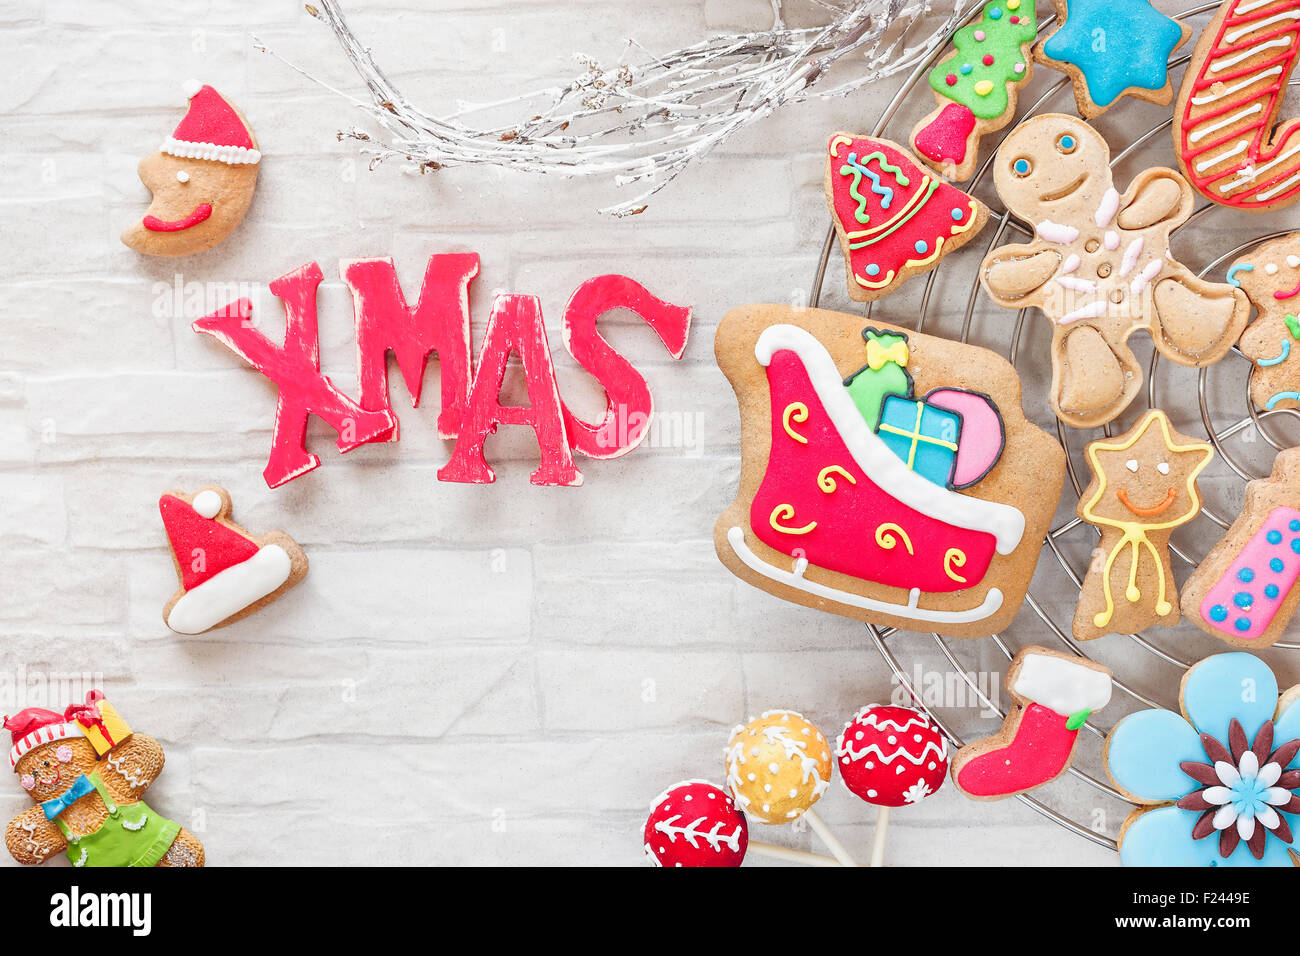 Christmas baking. Various types of Christmas decorative cookies decorated with sugar icing on cooling rack and XMAS letters Stock Photo